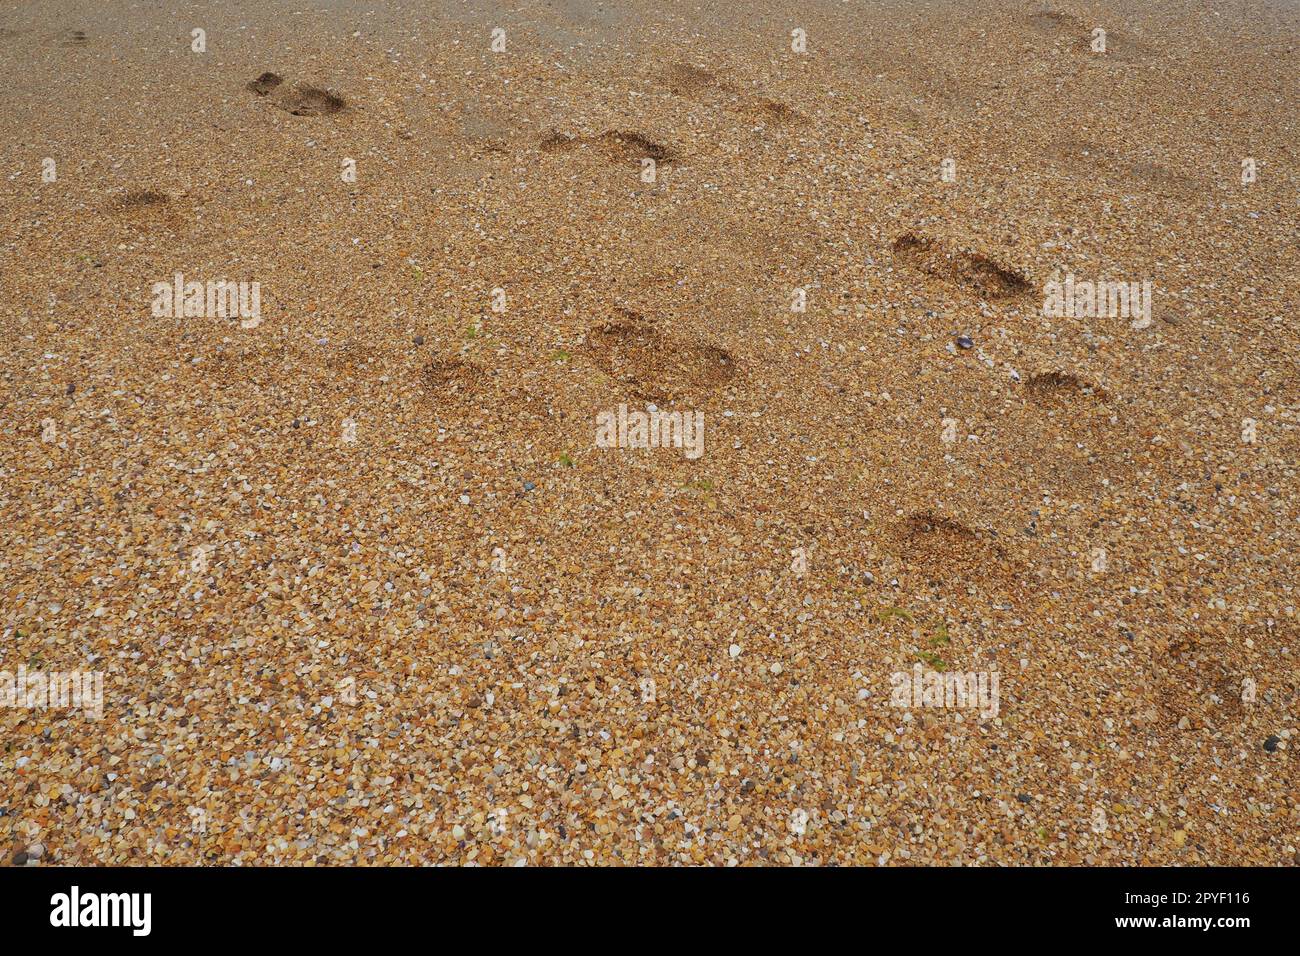 and Wet stock footprints Alamy photography - images hi-res sand